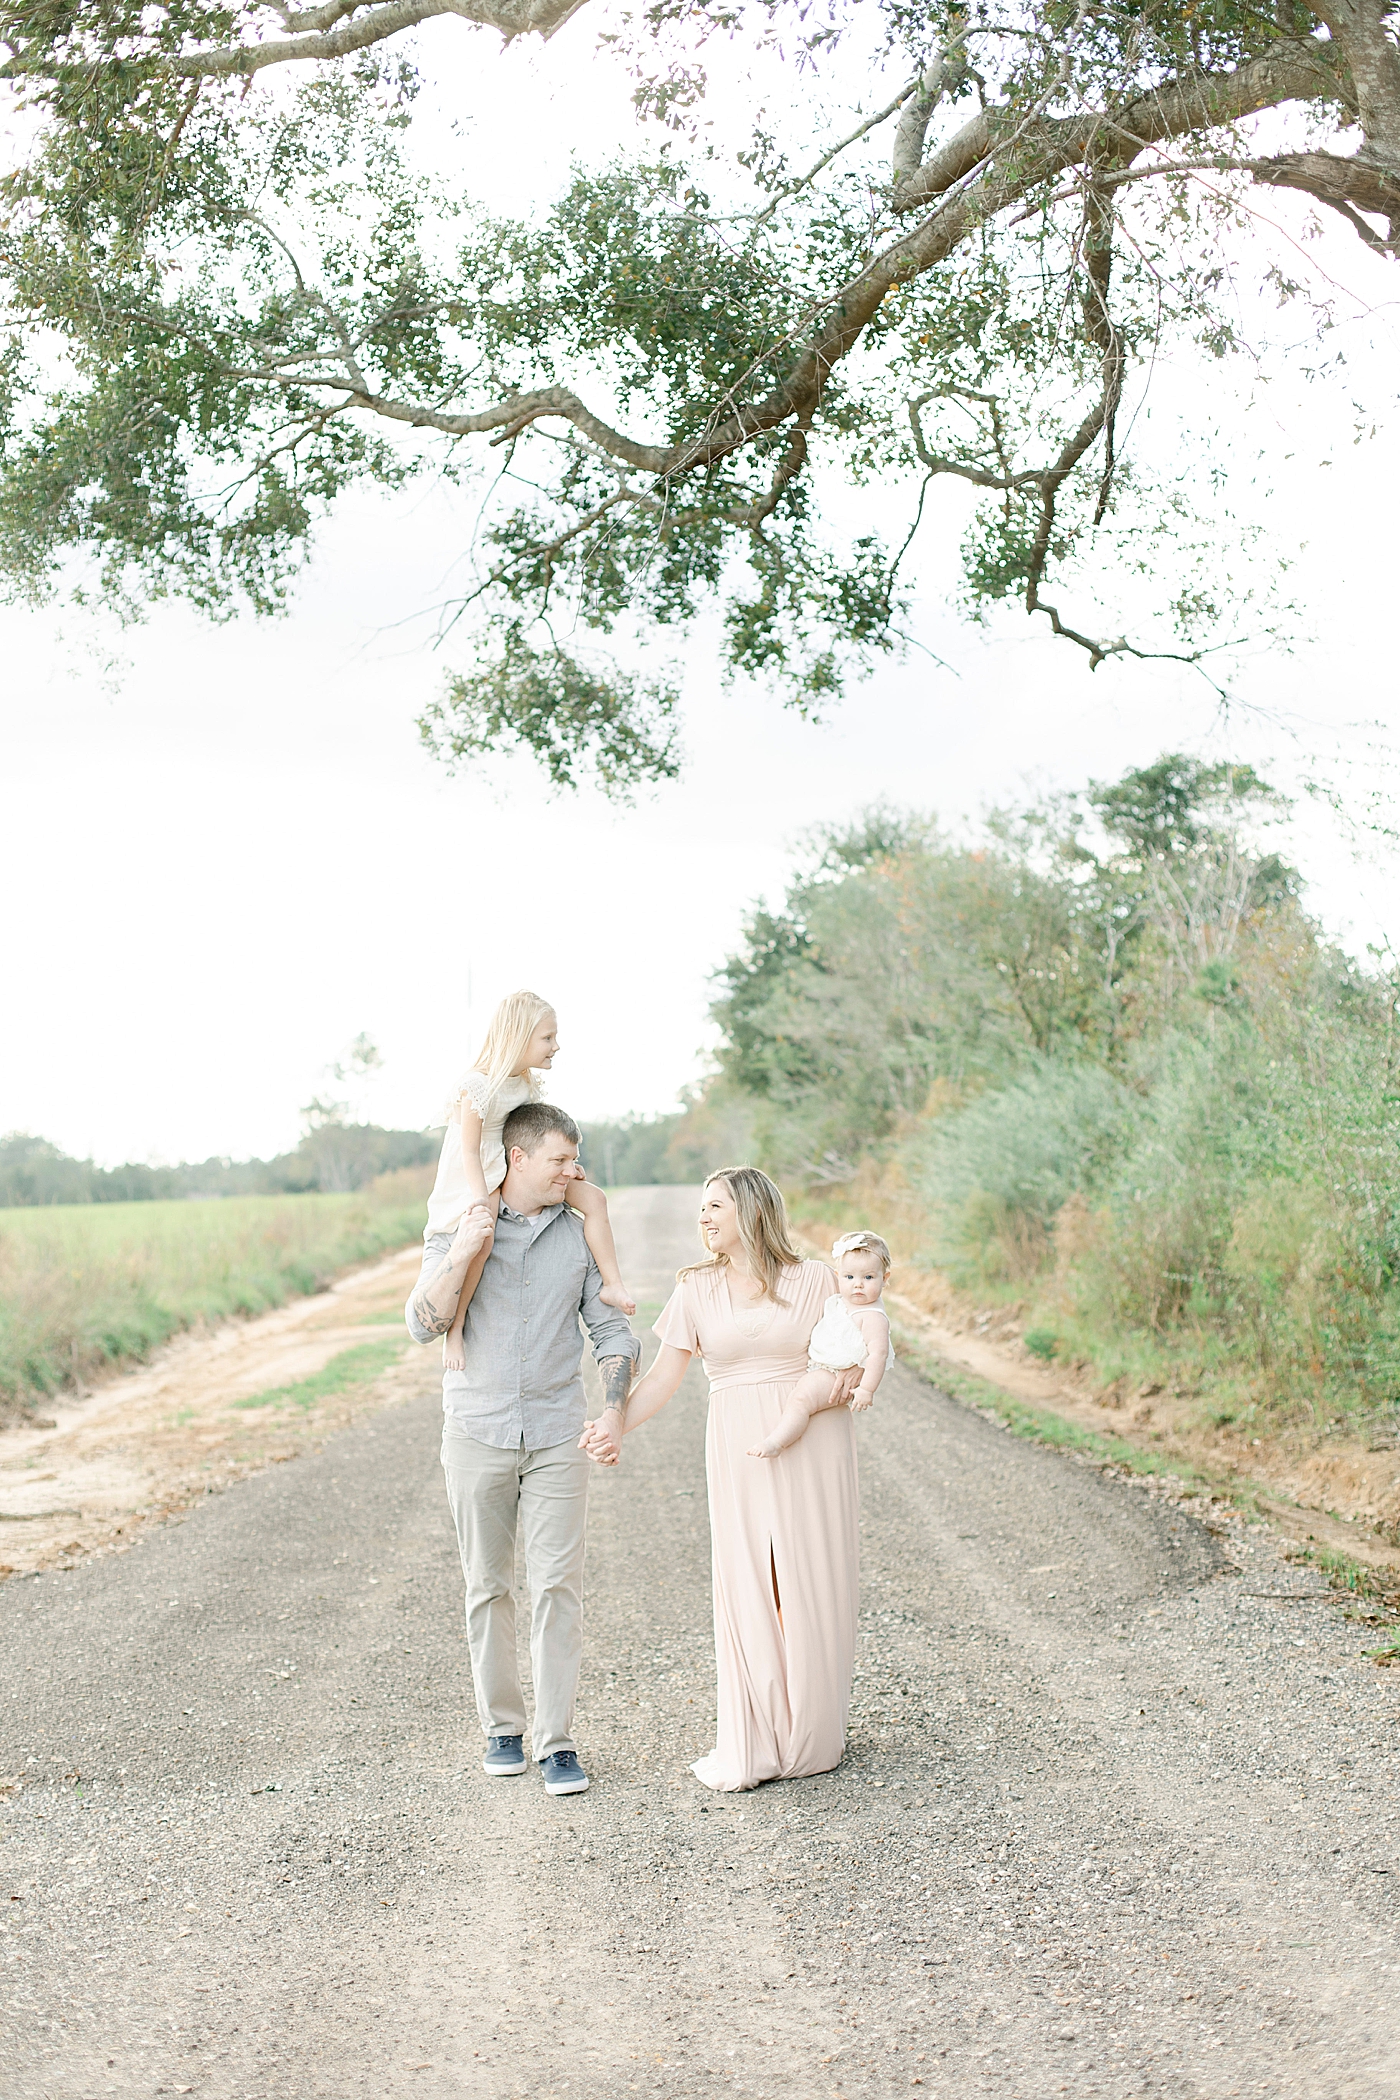 Family walking together on a dirt path | Photo by Hattiesburg MS family photographer Little Sunshine Photography 